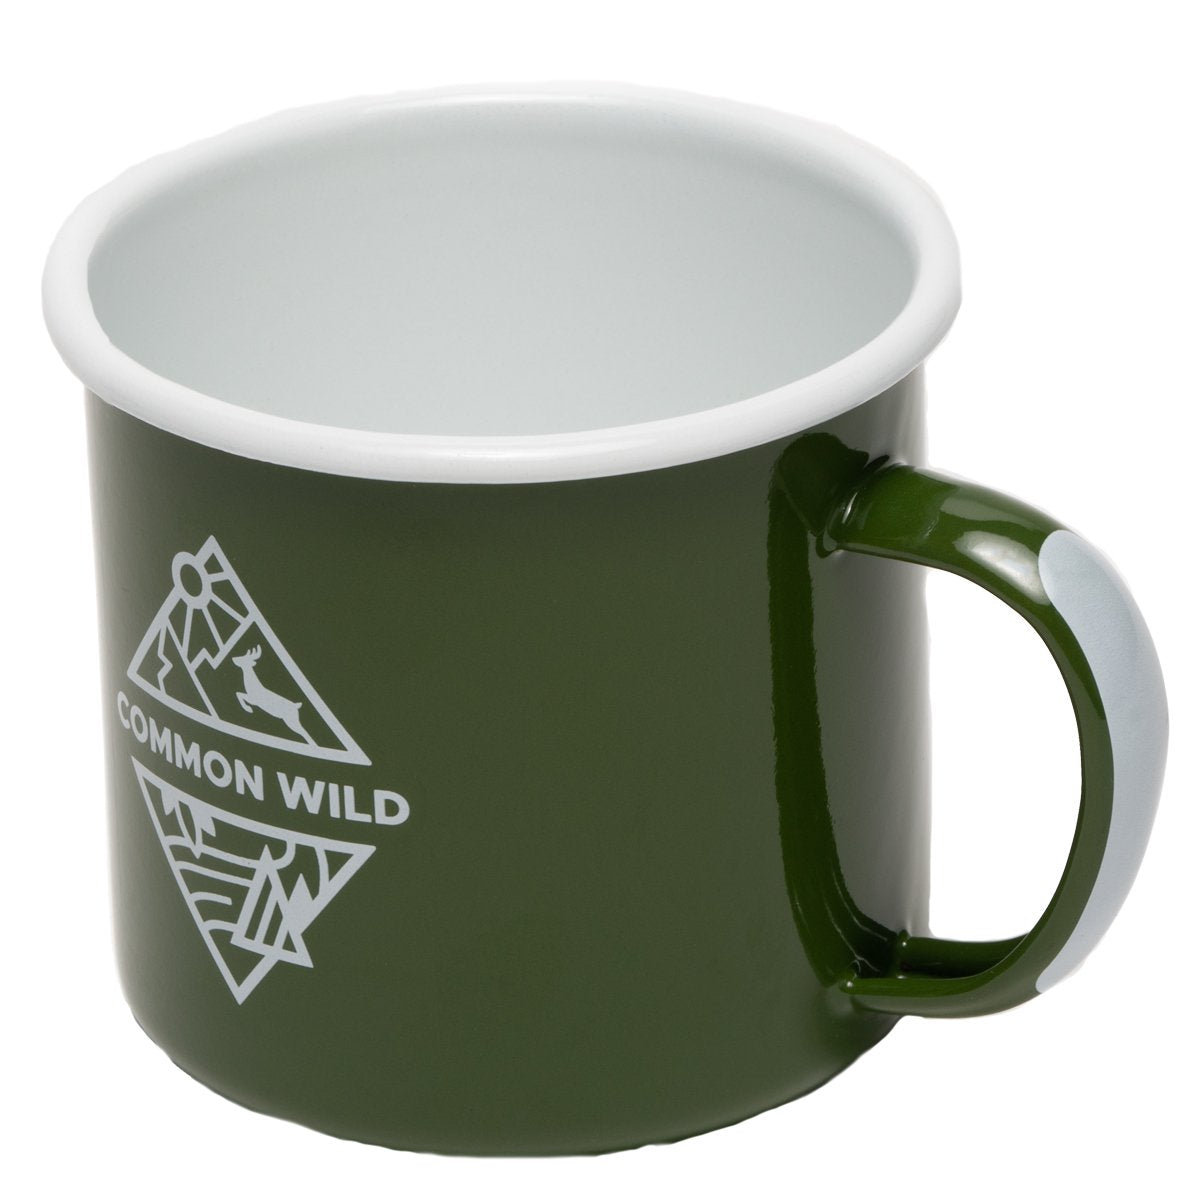 Common Wild Camp Mug in  by GOHUNT | Common Wild - GOHUNT Shop